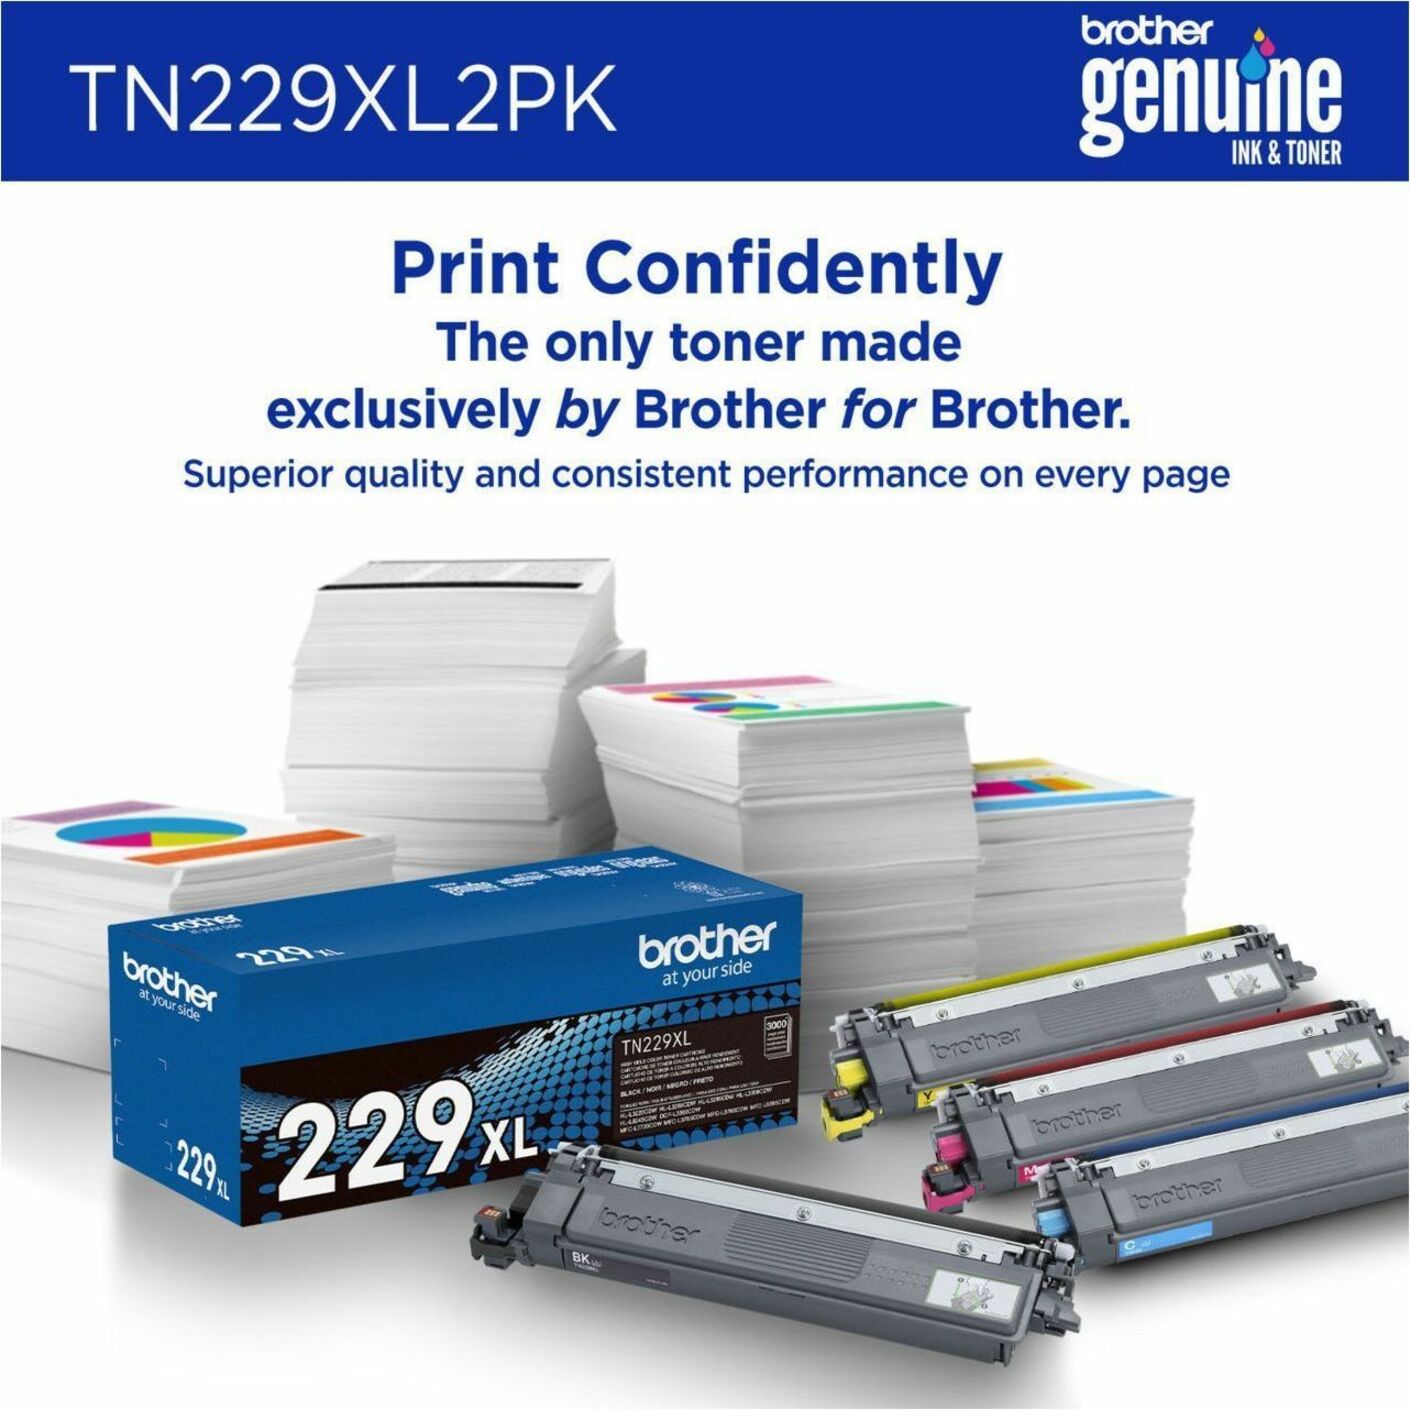 Brother TN229XL2PK High-yield Black Toner Cartridge Twin-Pack, for Brother Printers